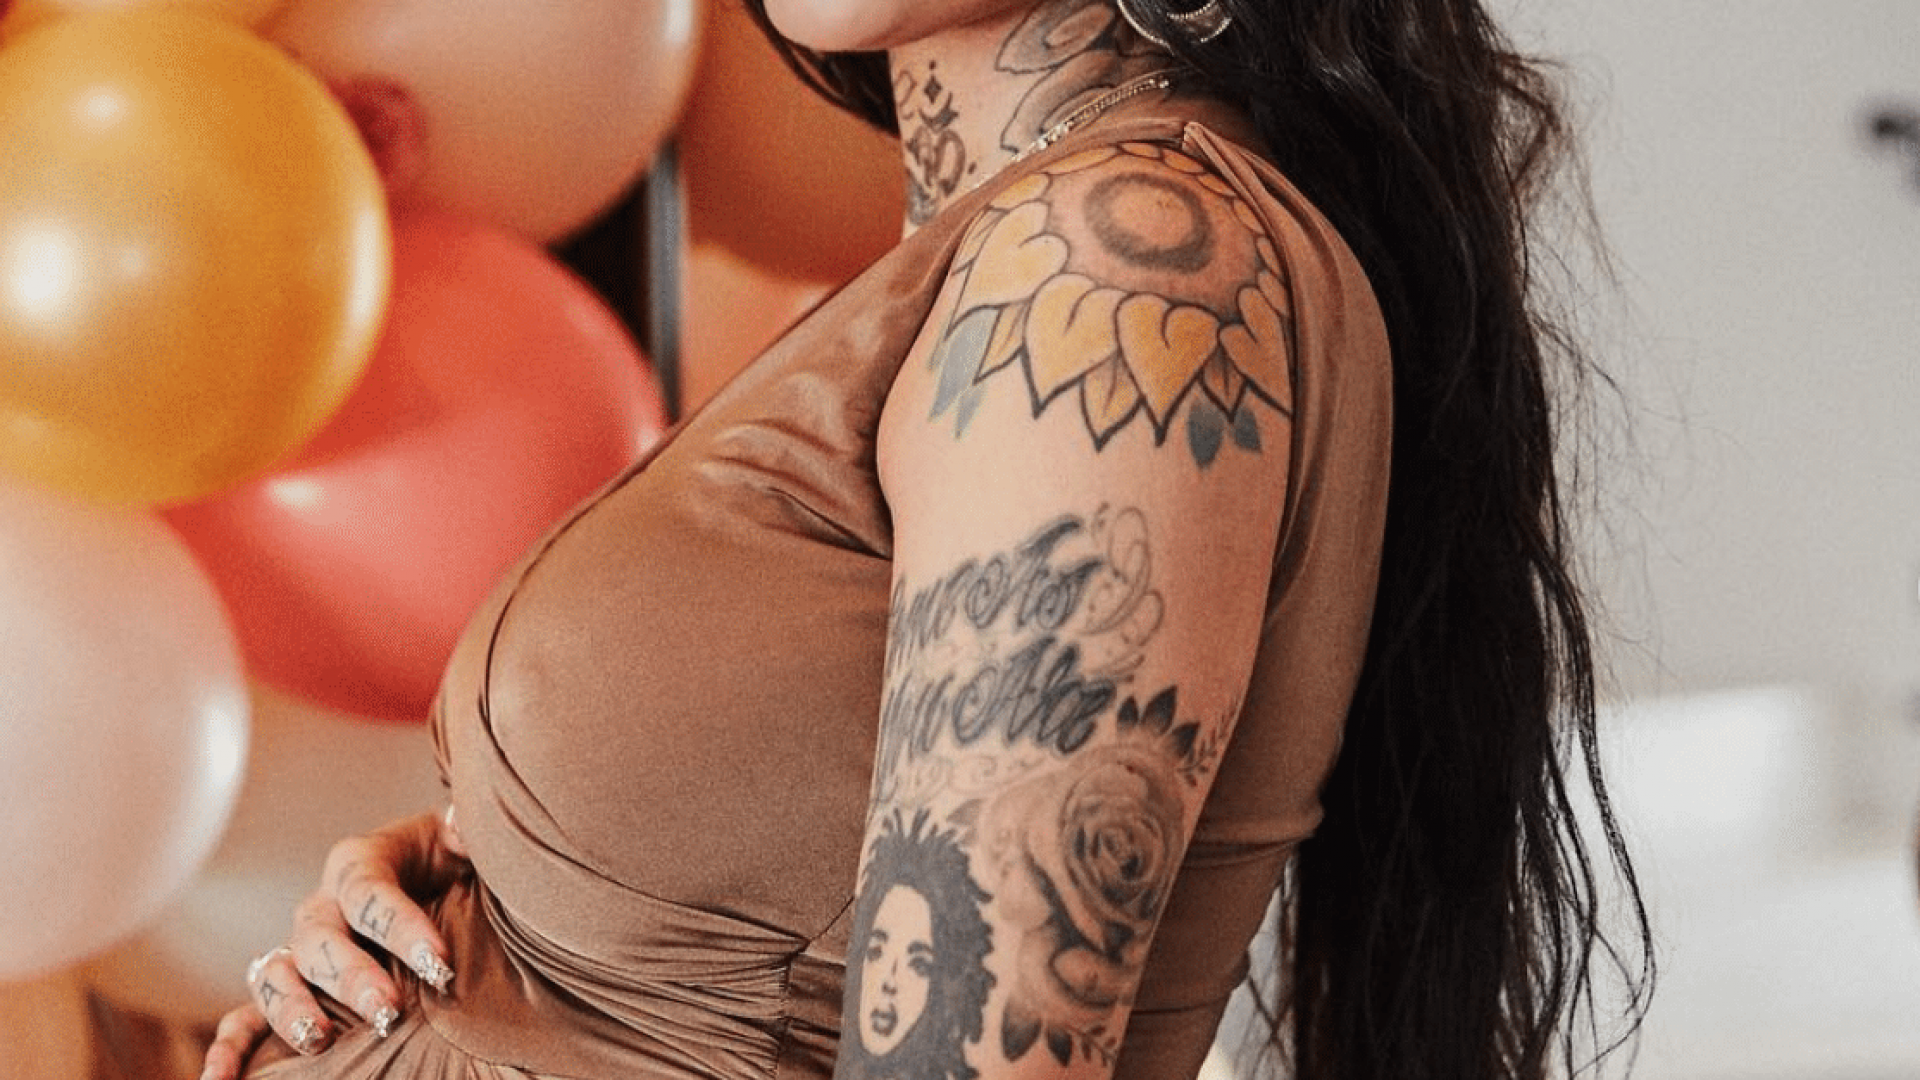 She's Here! Kehlani Announces The Birth Of Her Daughter, Adeya